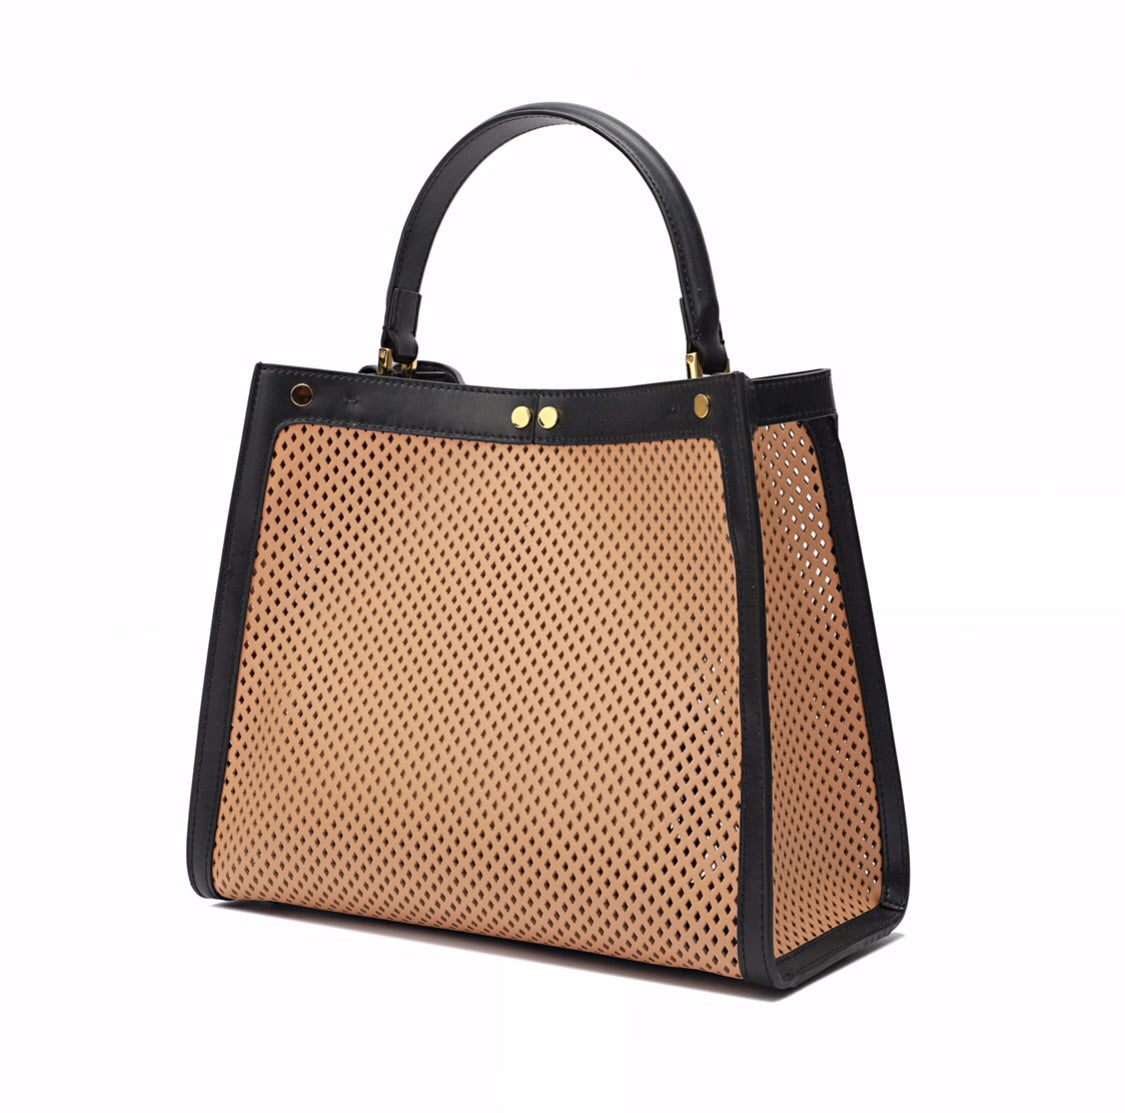 Full-grain Smooth Leather Perforated Tote